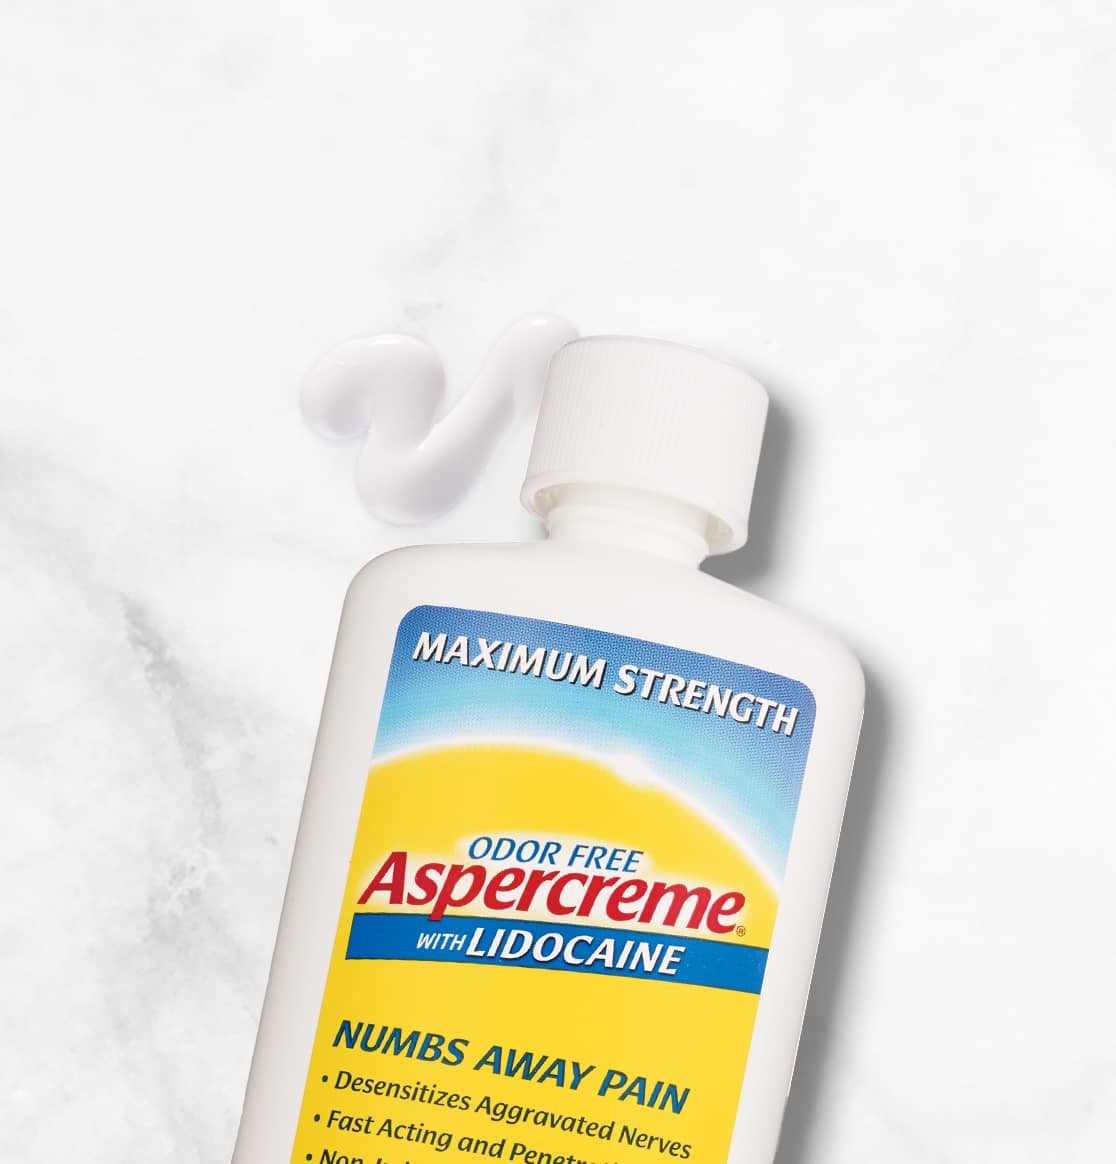 Shop now for lotions and creams, showing Aspercreme brand lotion example.